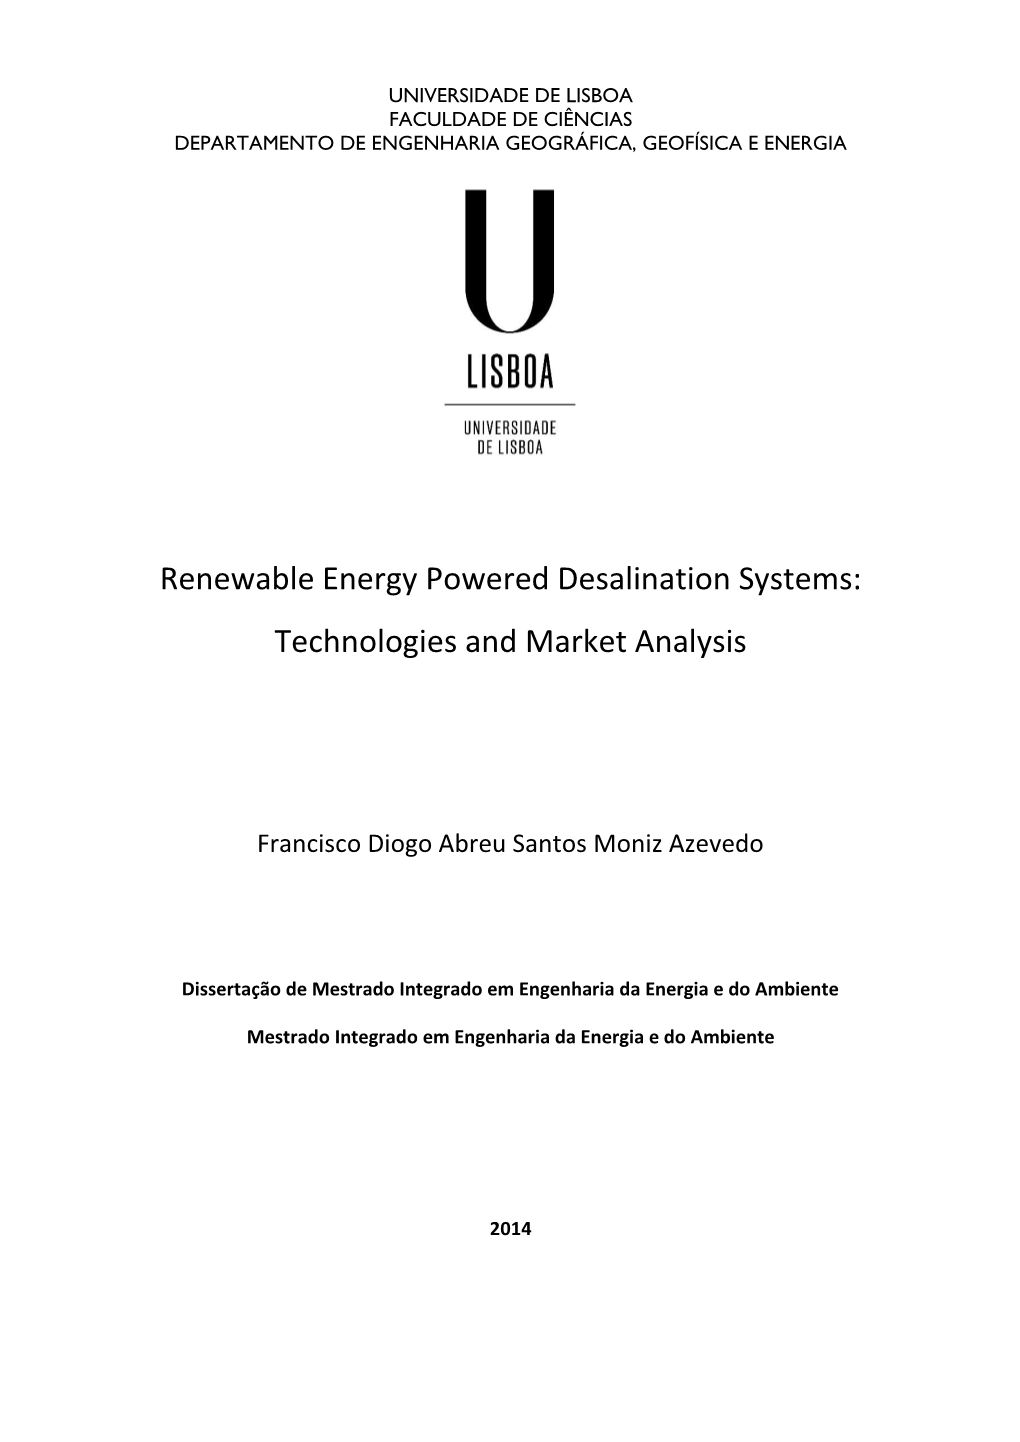 Renewable Energy Powered Desalination Systems: Technologies and Market Analysis